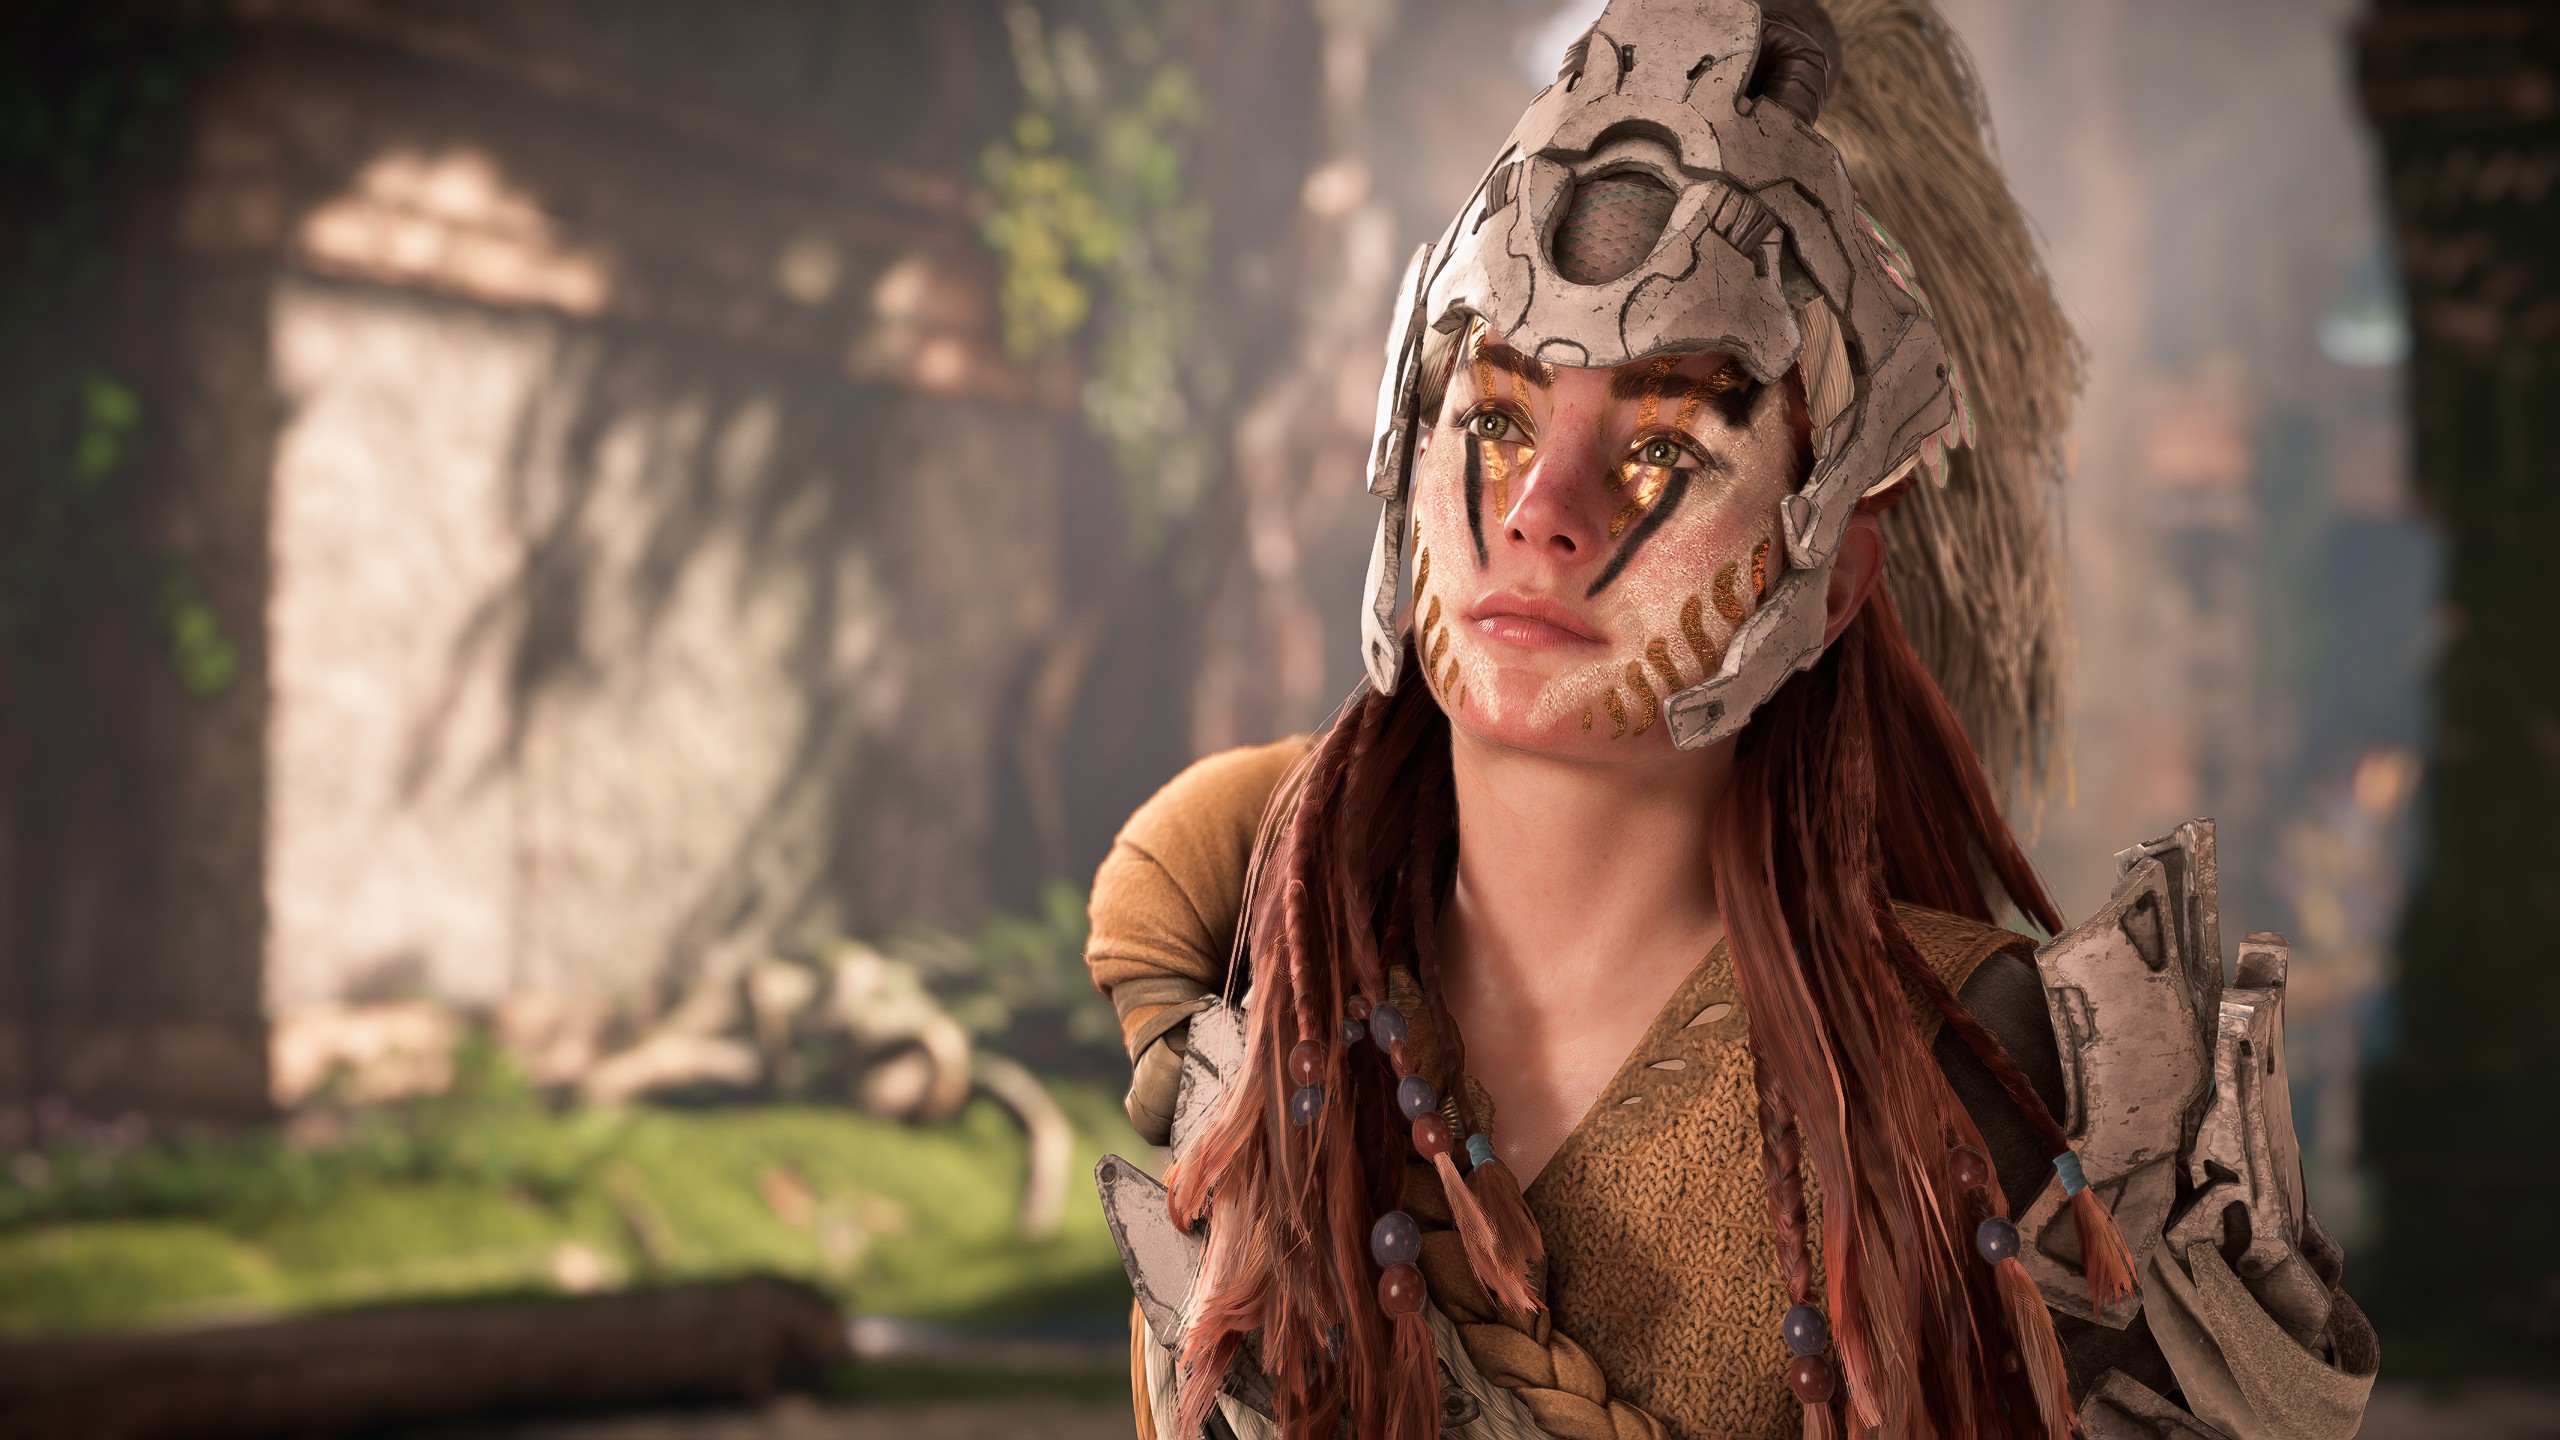 General 2560x1440 Horizon Forbidden West video game characters video game girls Aloy video game art screen shot video games depth of field blurry background CGI closed mouth long hair brunette blue eyes looking away sunlight